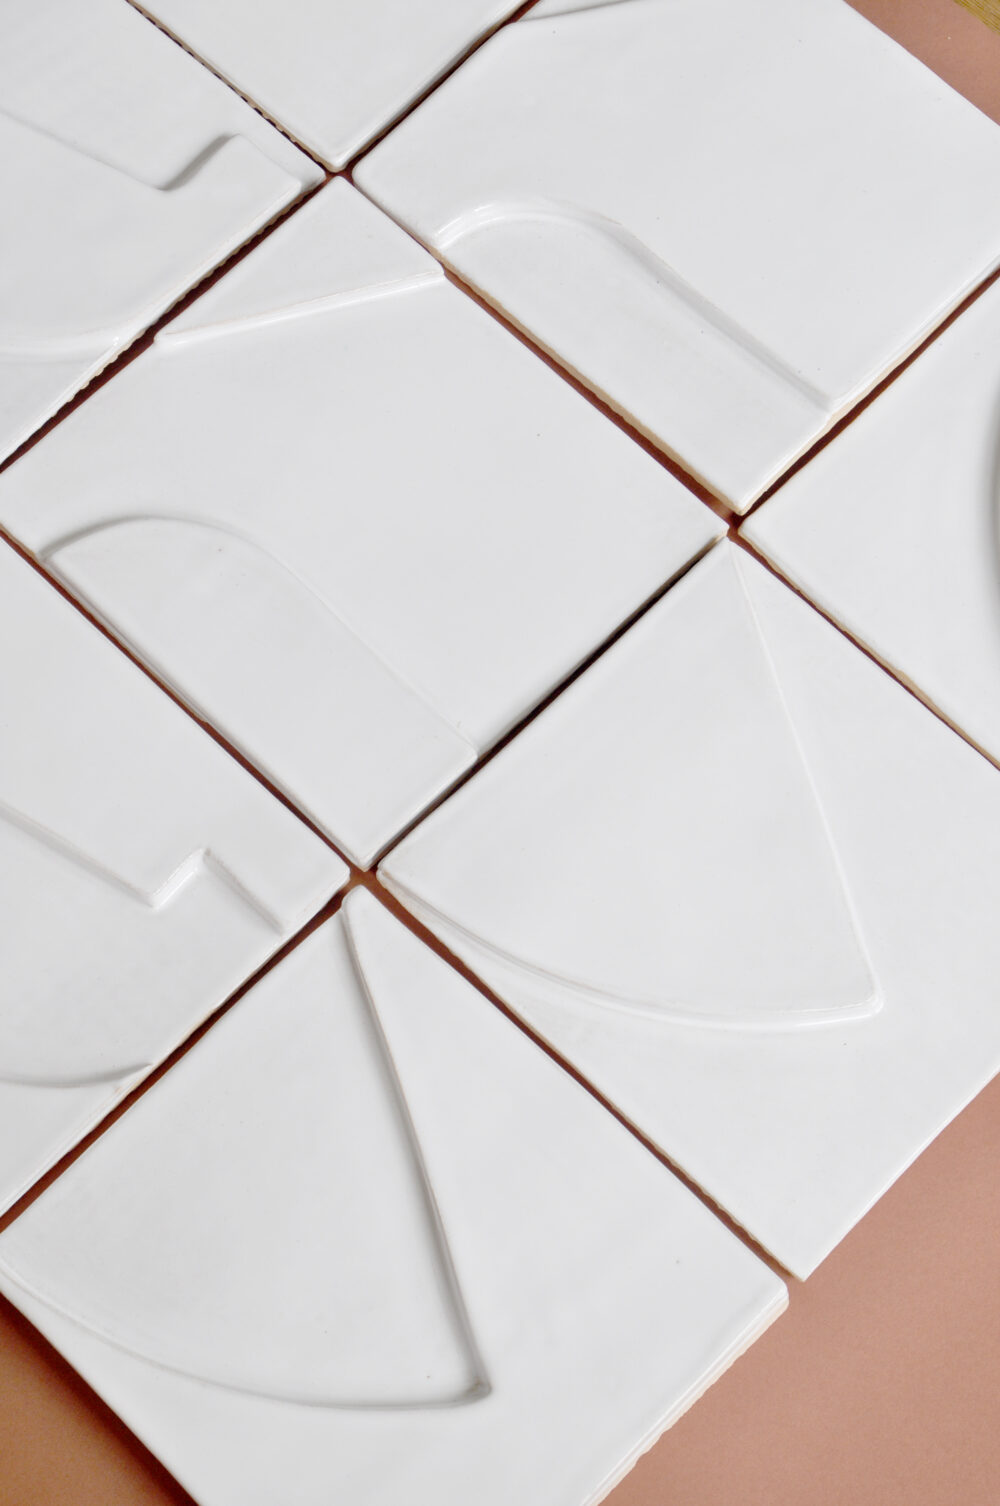 White smooth handmade relief ceramic tiles on terracotta background